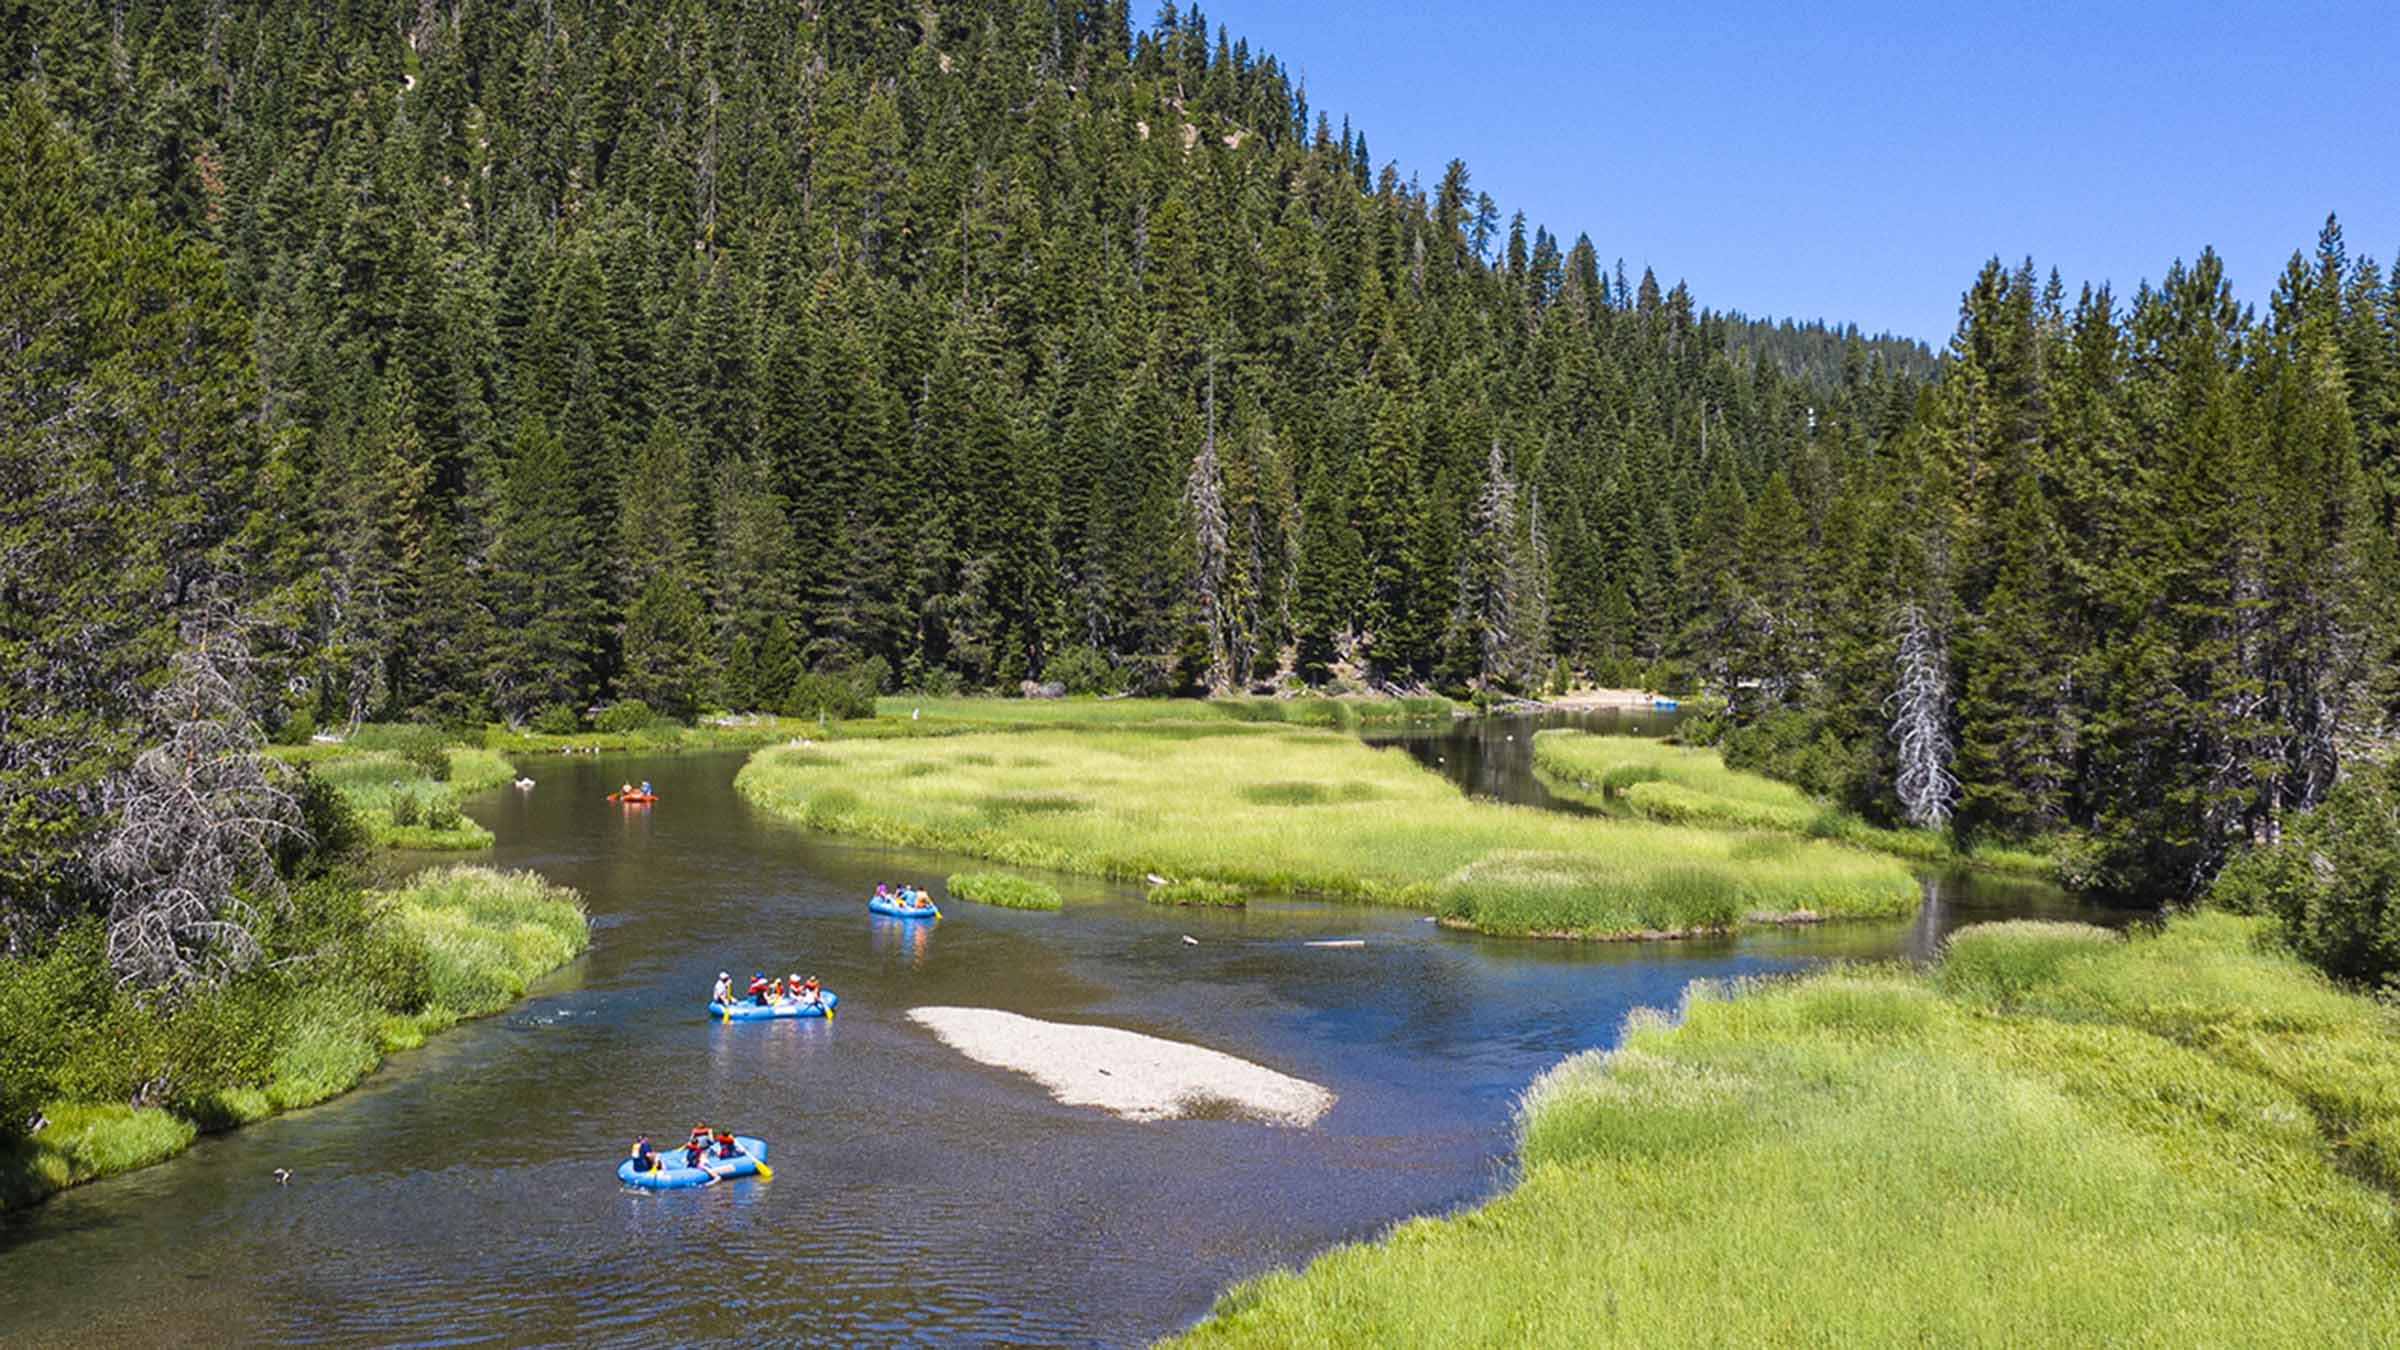 Rafting the leisurely Truckee River is a popular activity in the summer.